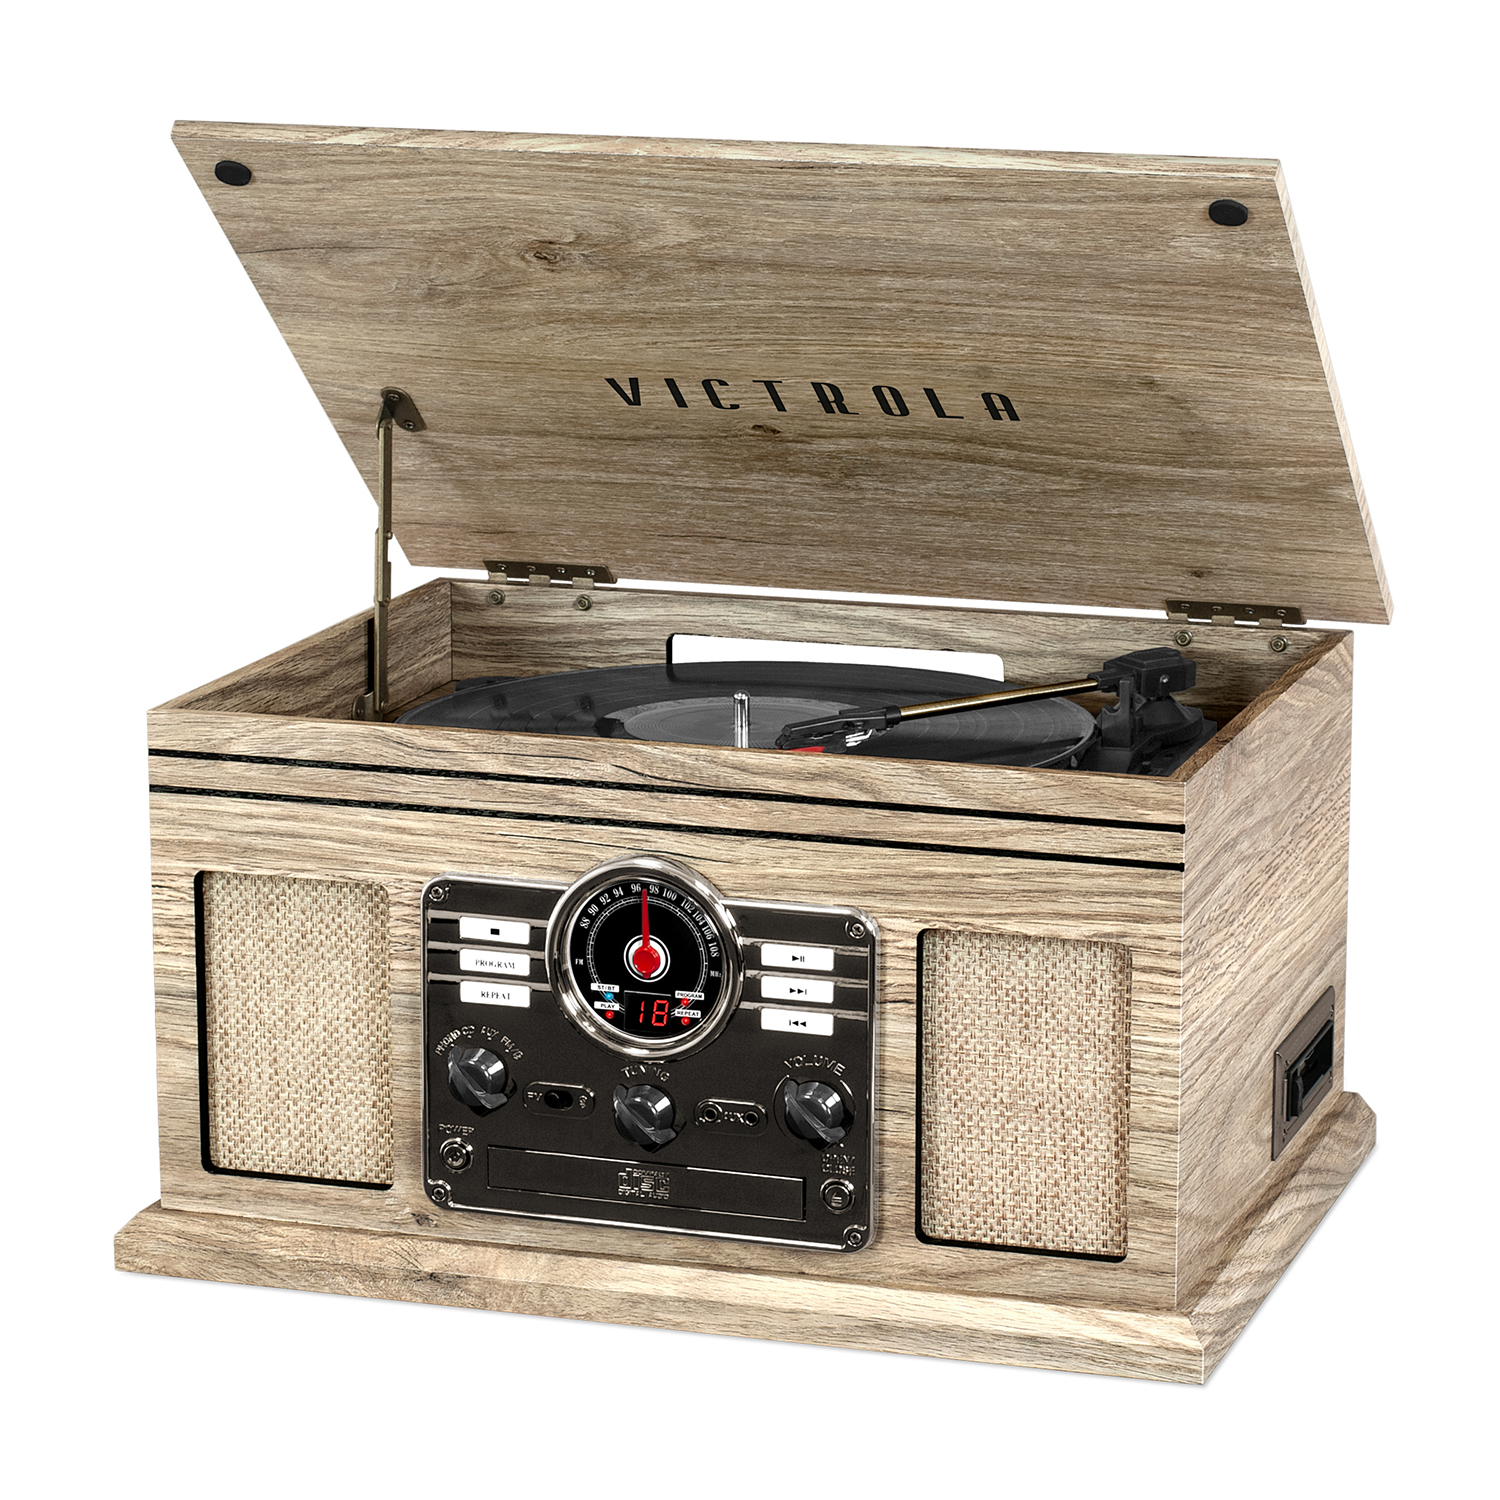 Victrola 6-in-1 Nostalgic Bluetooth Record Player with 3-speed Turntable - image 1 of 2